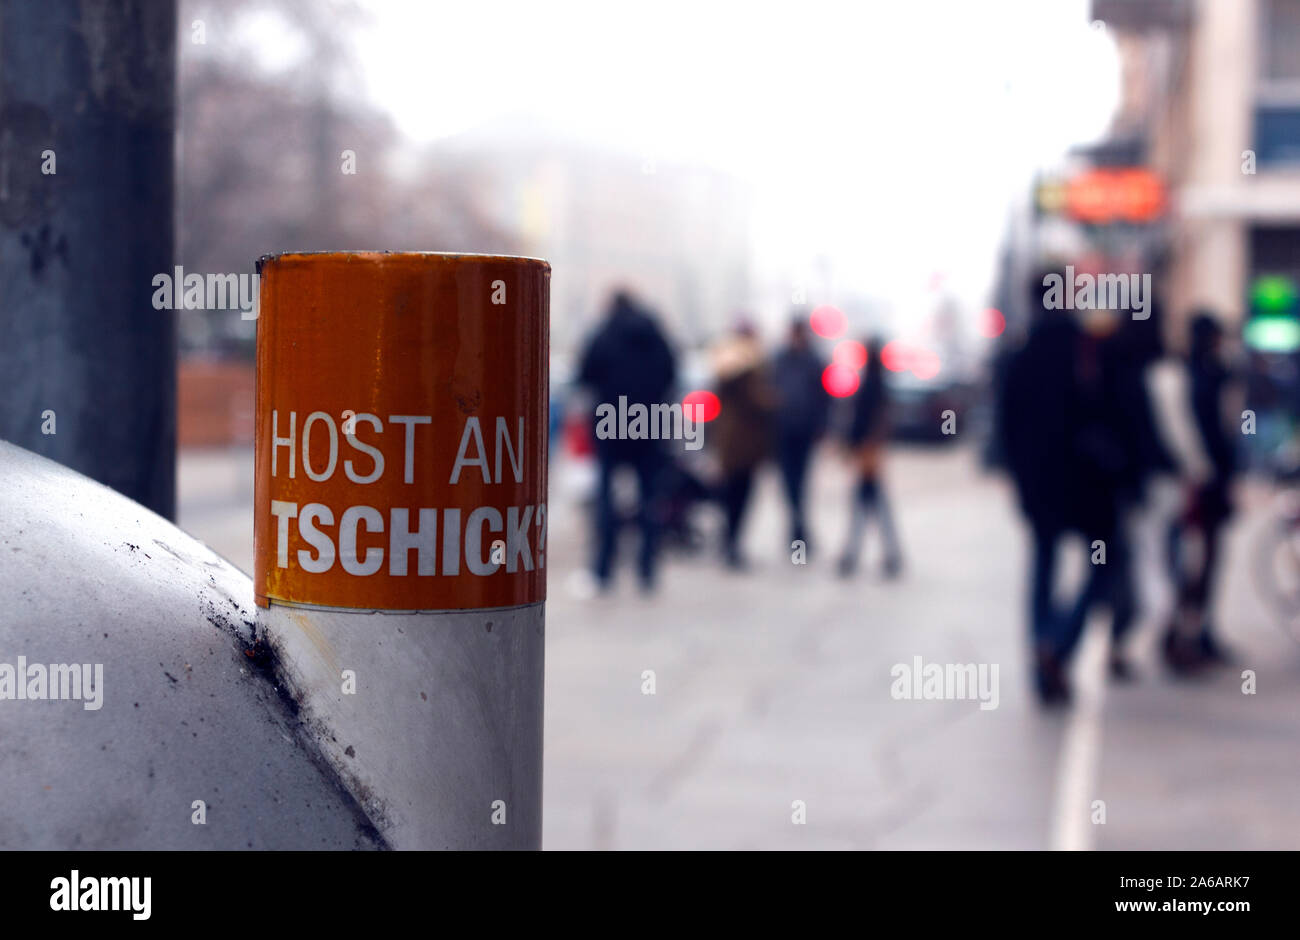 Closeup shot of the Cigarette butt extinguisher on the streets of Vienna, Austria. Stock Photo